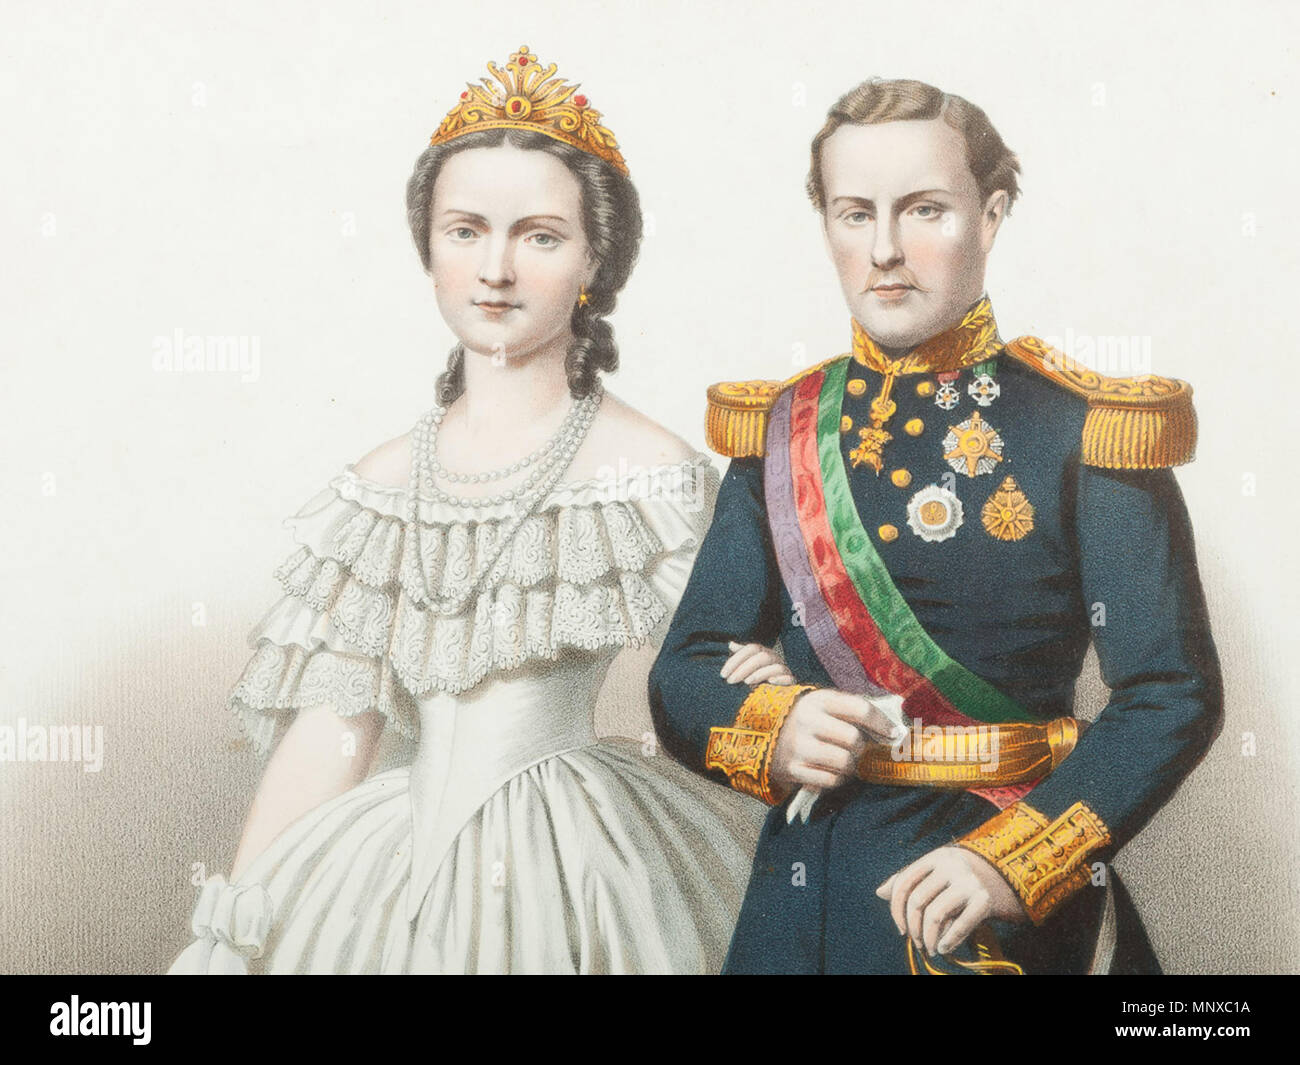 English: 'His Most Faithful Majesty King Luís I of Portugal and Queen Maria  Pia', by Adolphe Pincon Português: 'Sua Majestade Fidelíssima D. Luís I e D.  Maria Pia', por Adolphe Pincon .